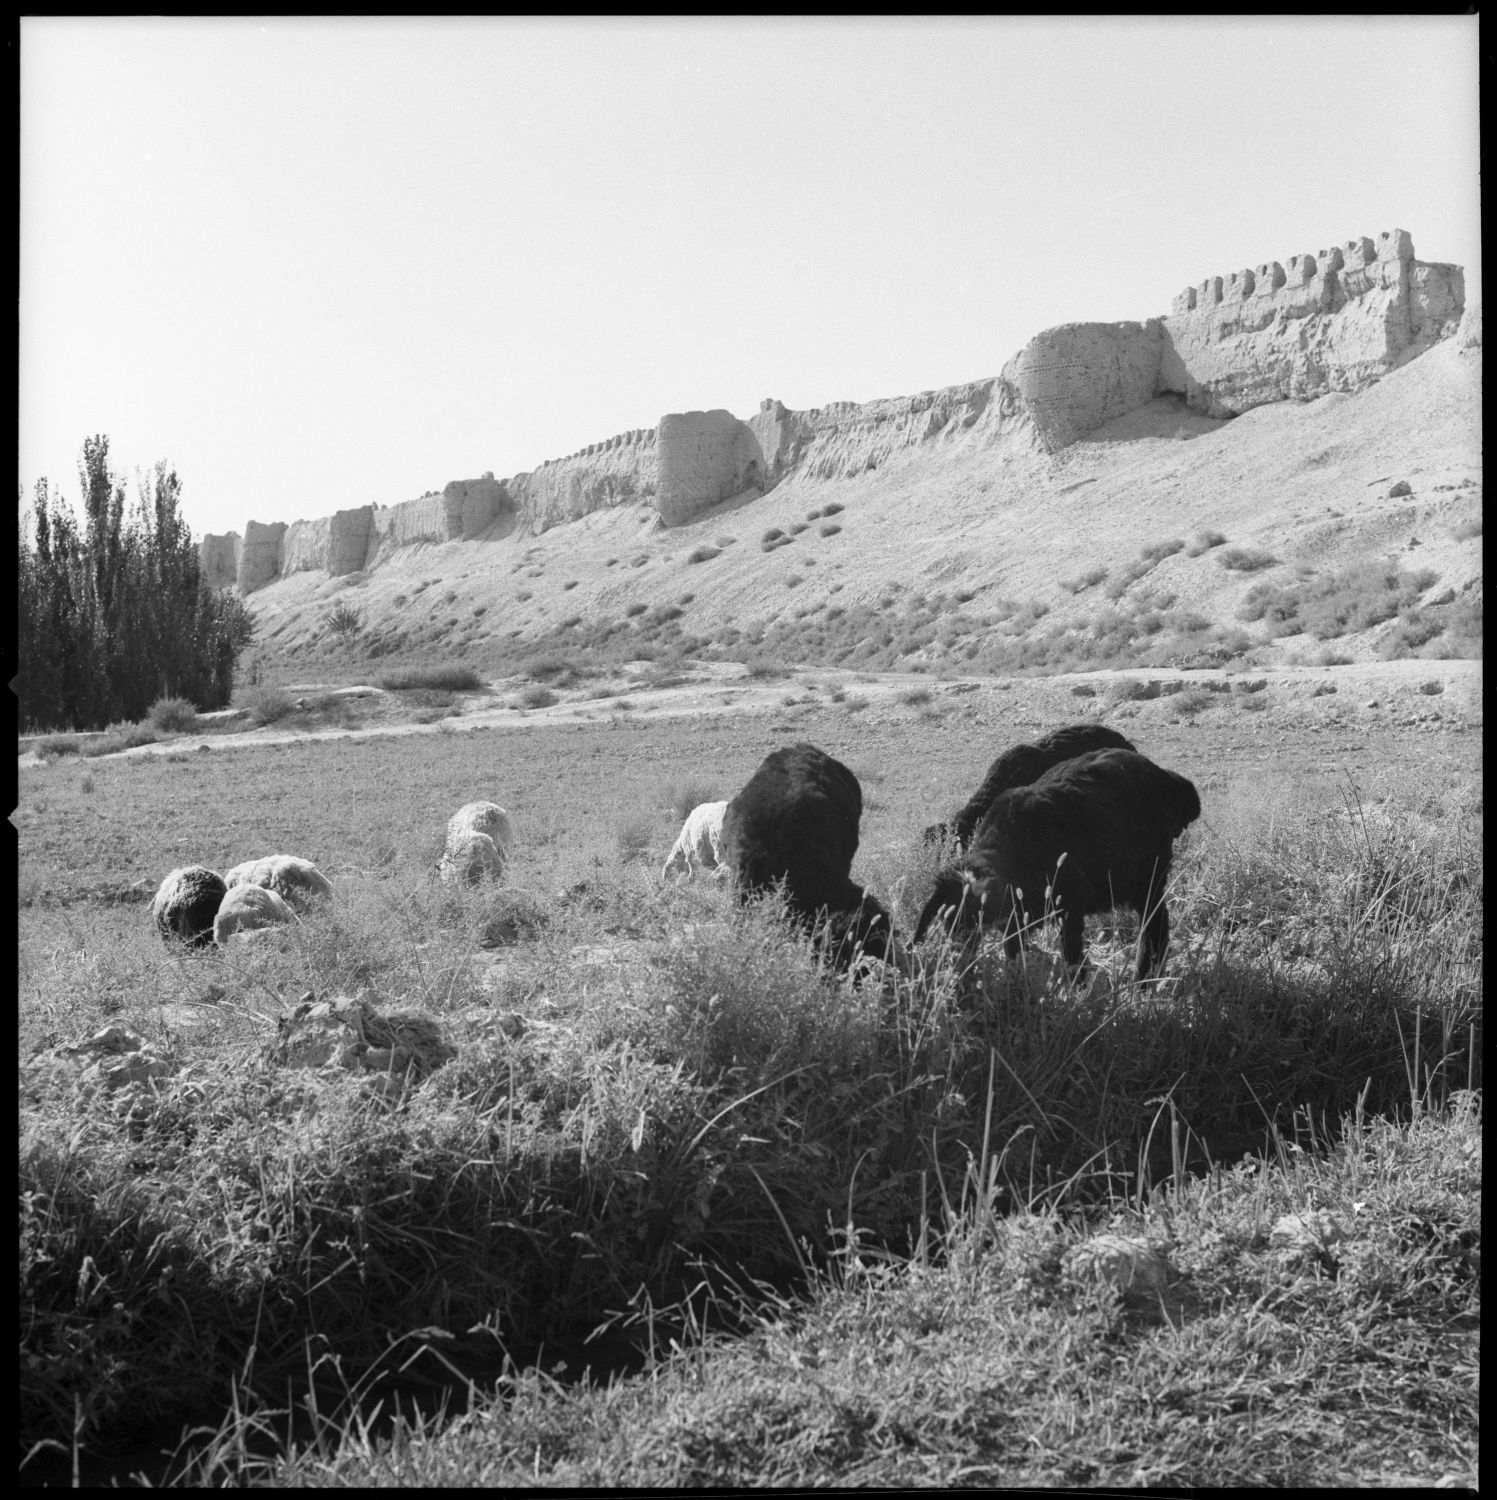 General view of walls with sheep grazing in foreground.